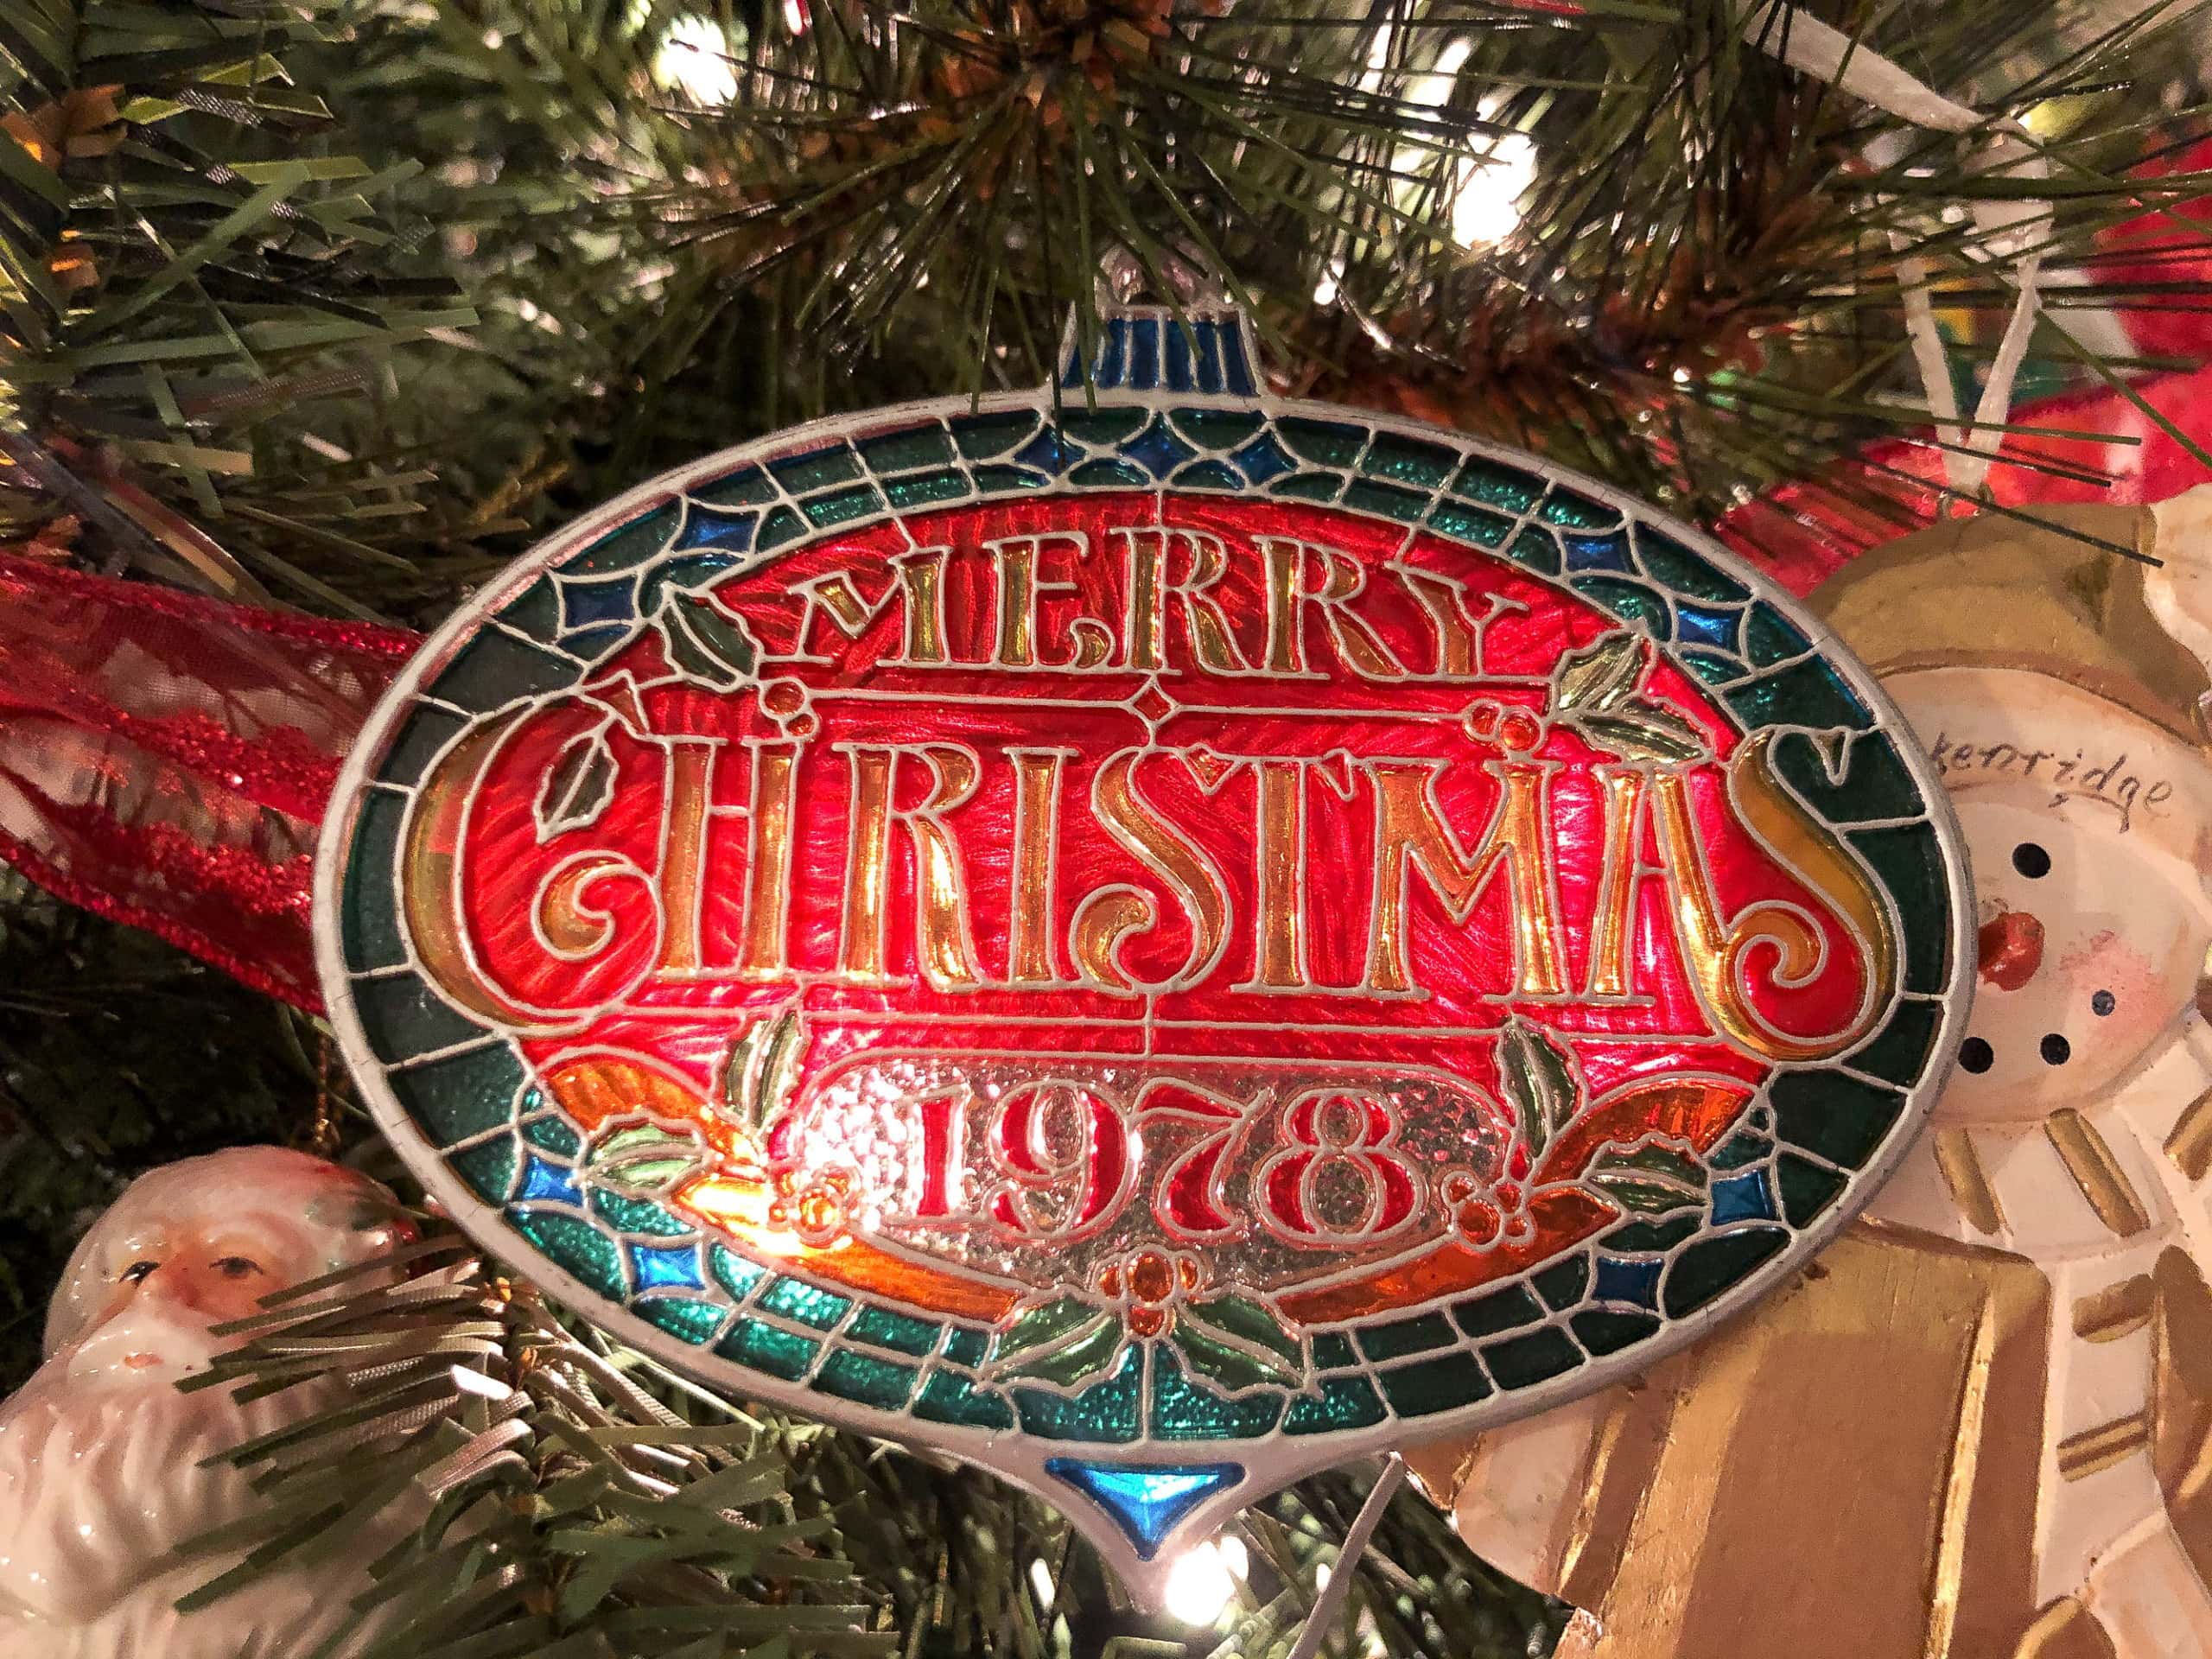 Ornament from 1978